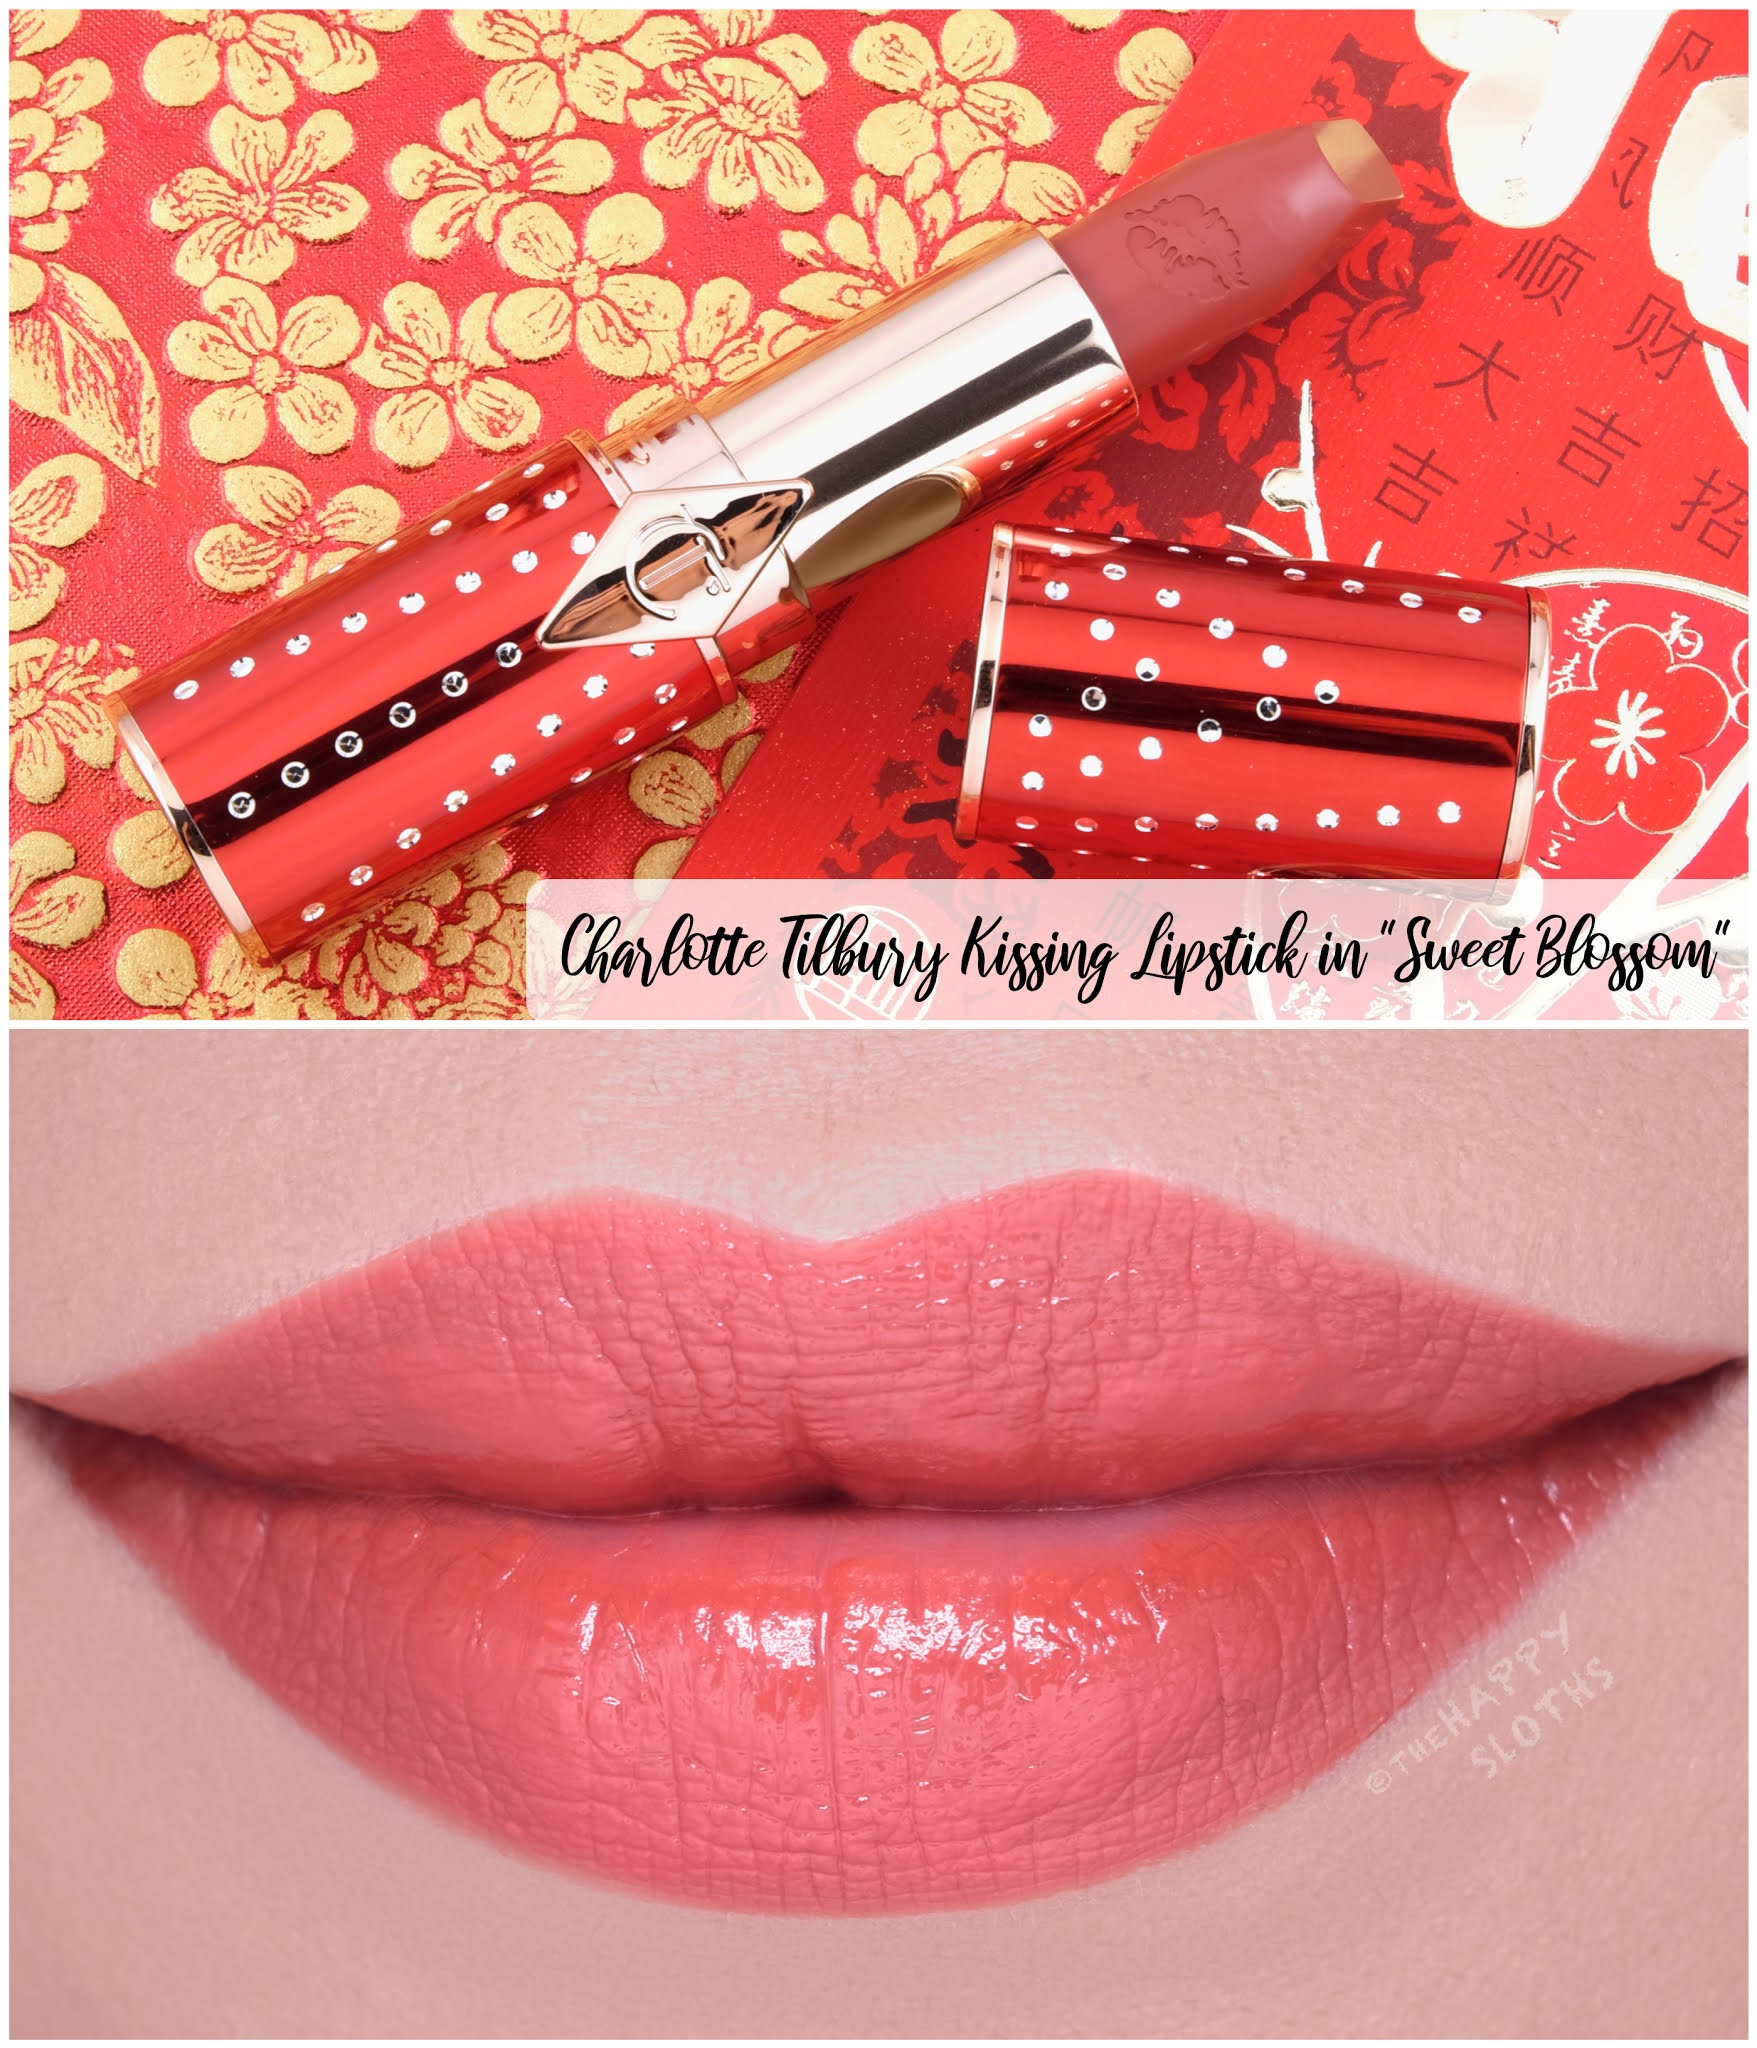 Charlotte Tilbury | Lunar New Year Kissing Lipstick in "Sweet Blossom": Review and Swatches